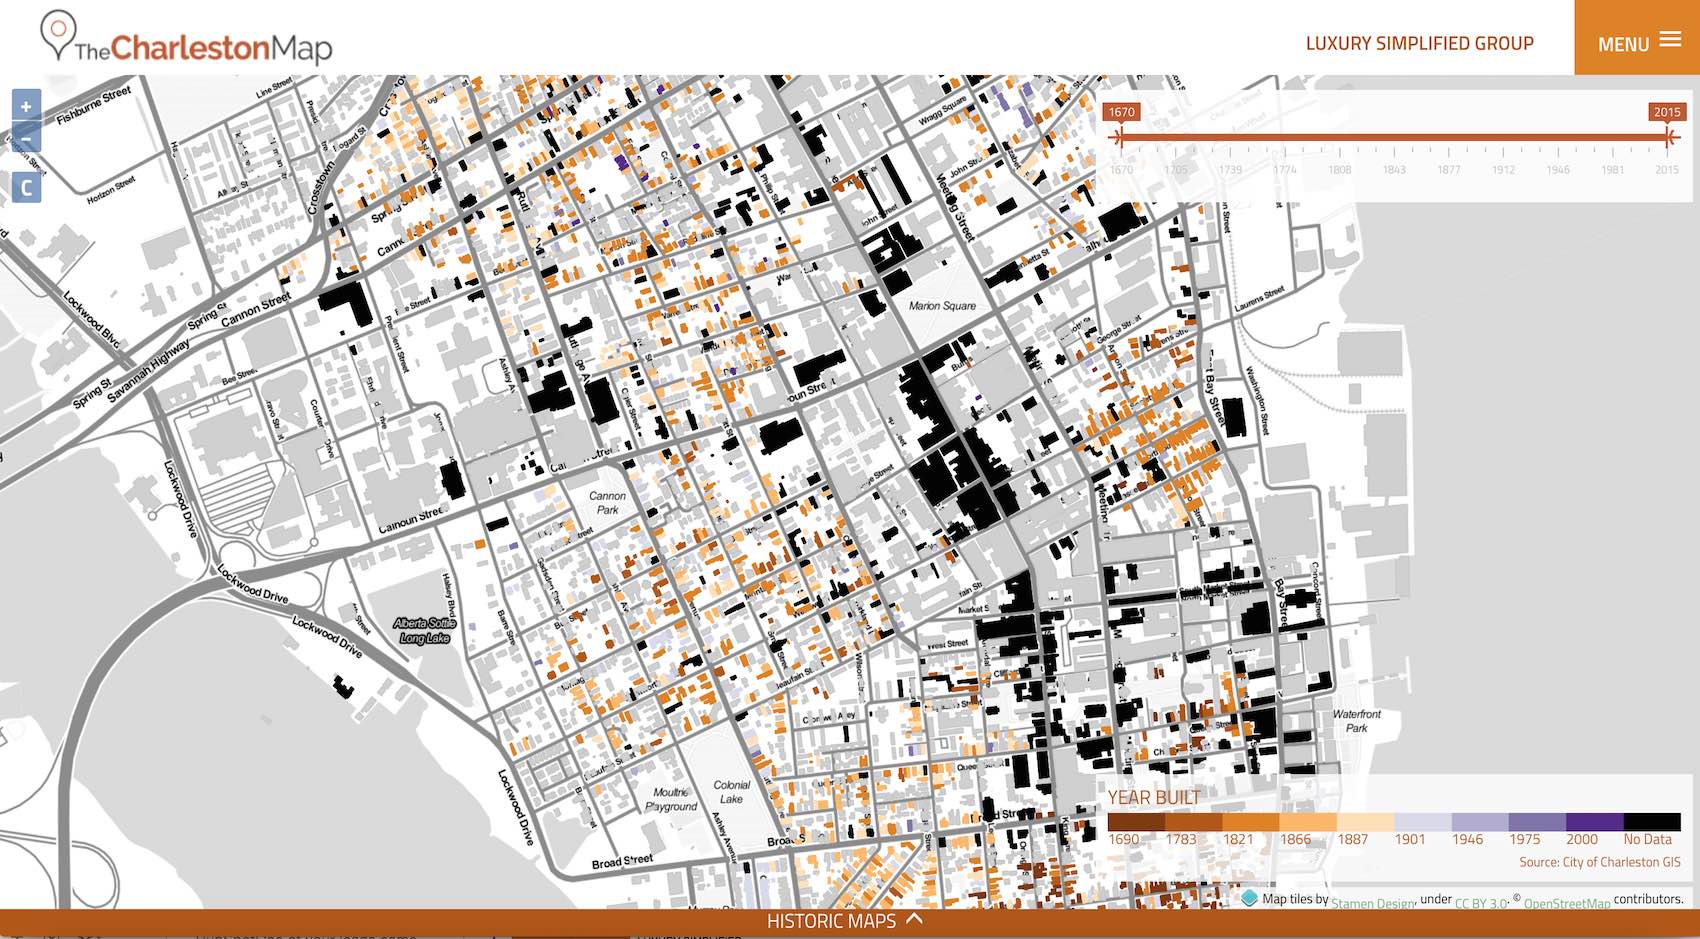 the-charleston-map-history-blended-with-modern-gis-data-blog-luxury